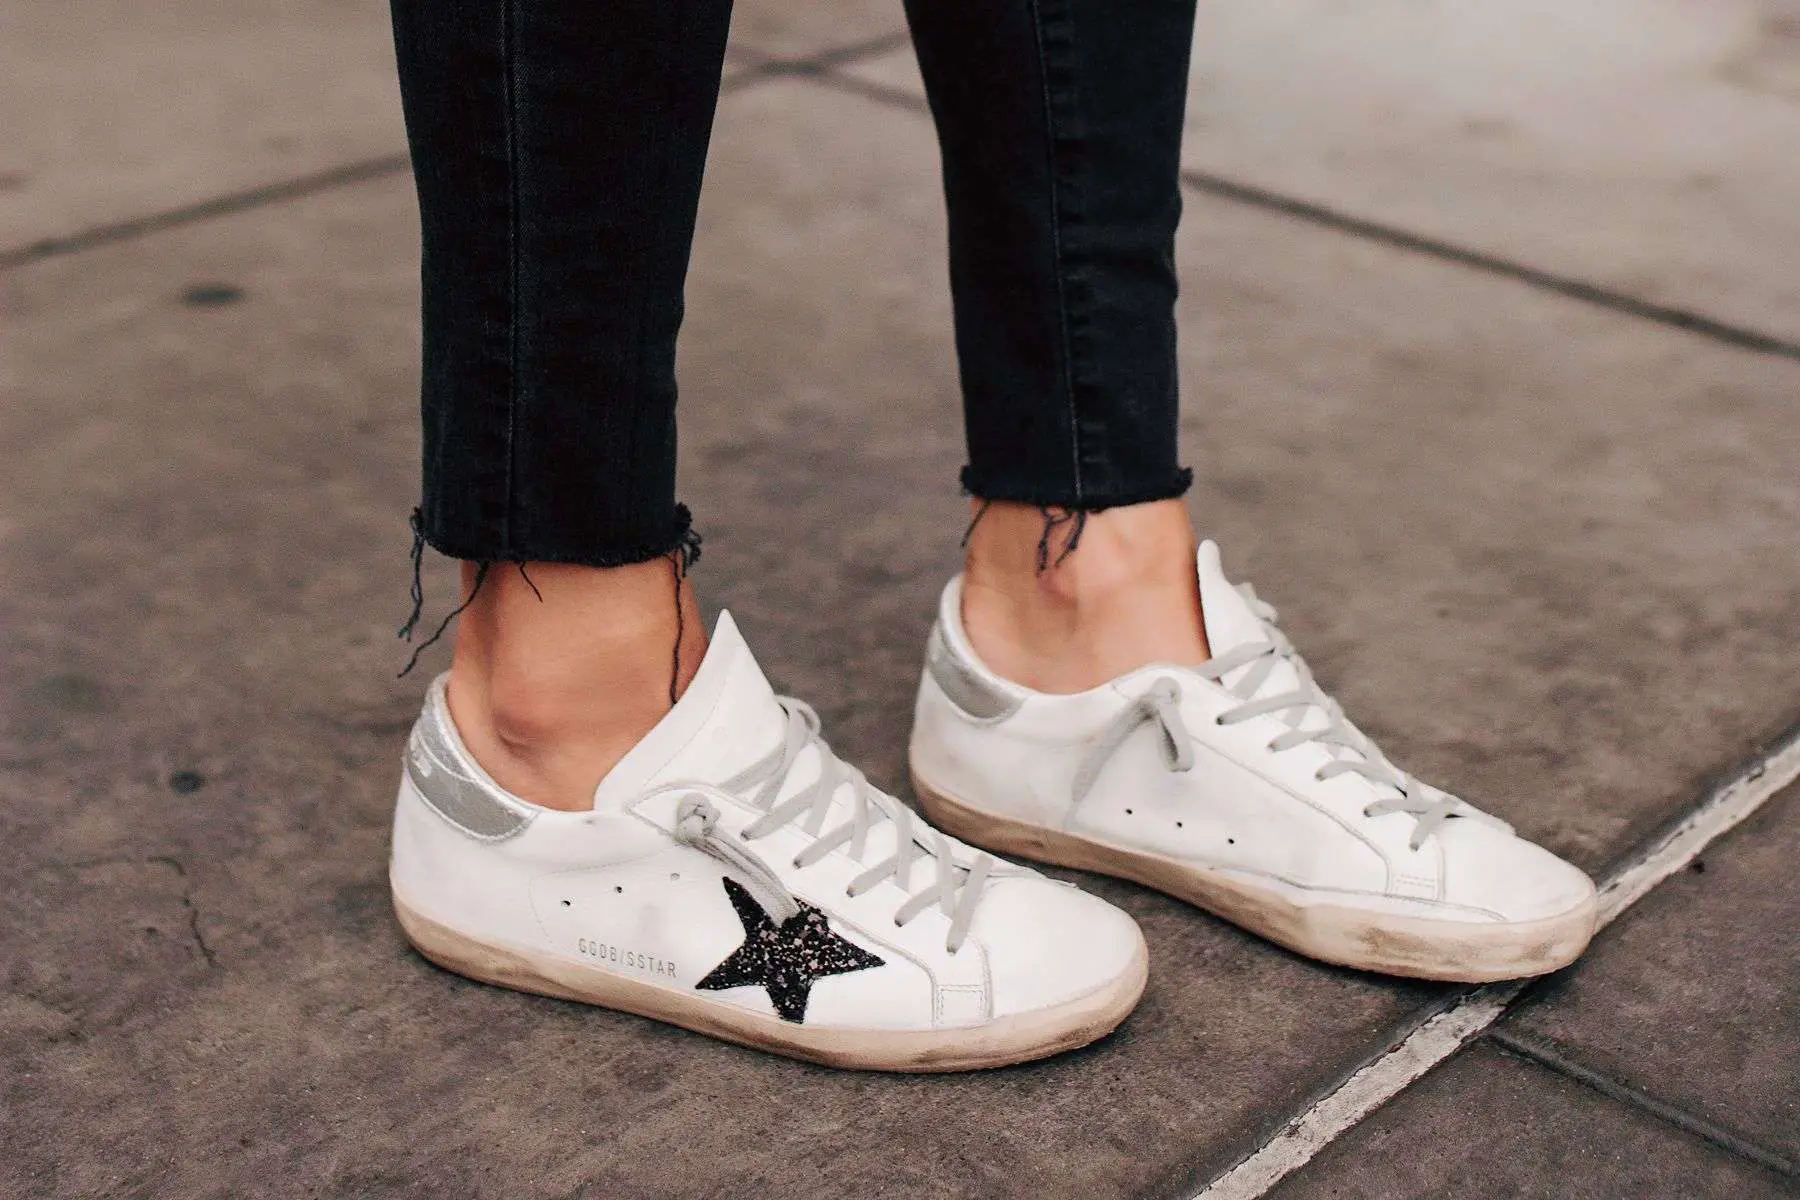 A Casual Way to Wear Golden Goose Sneakers